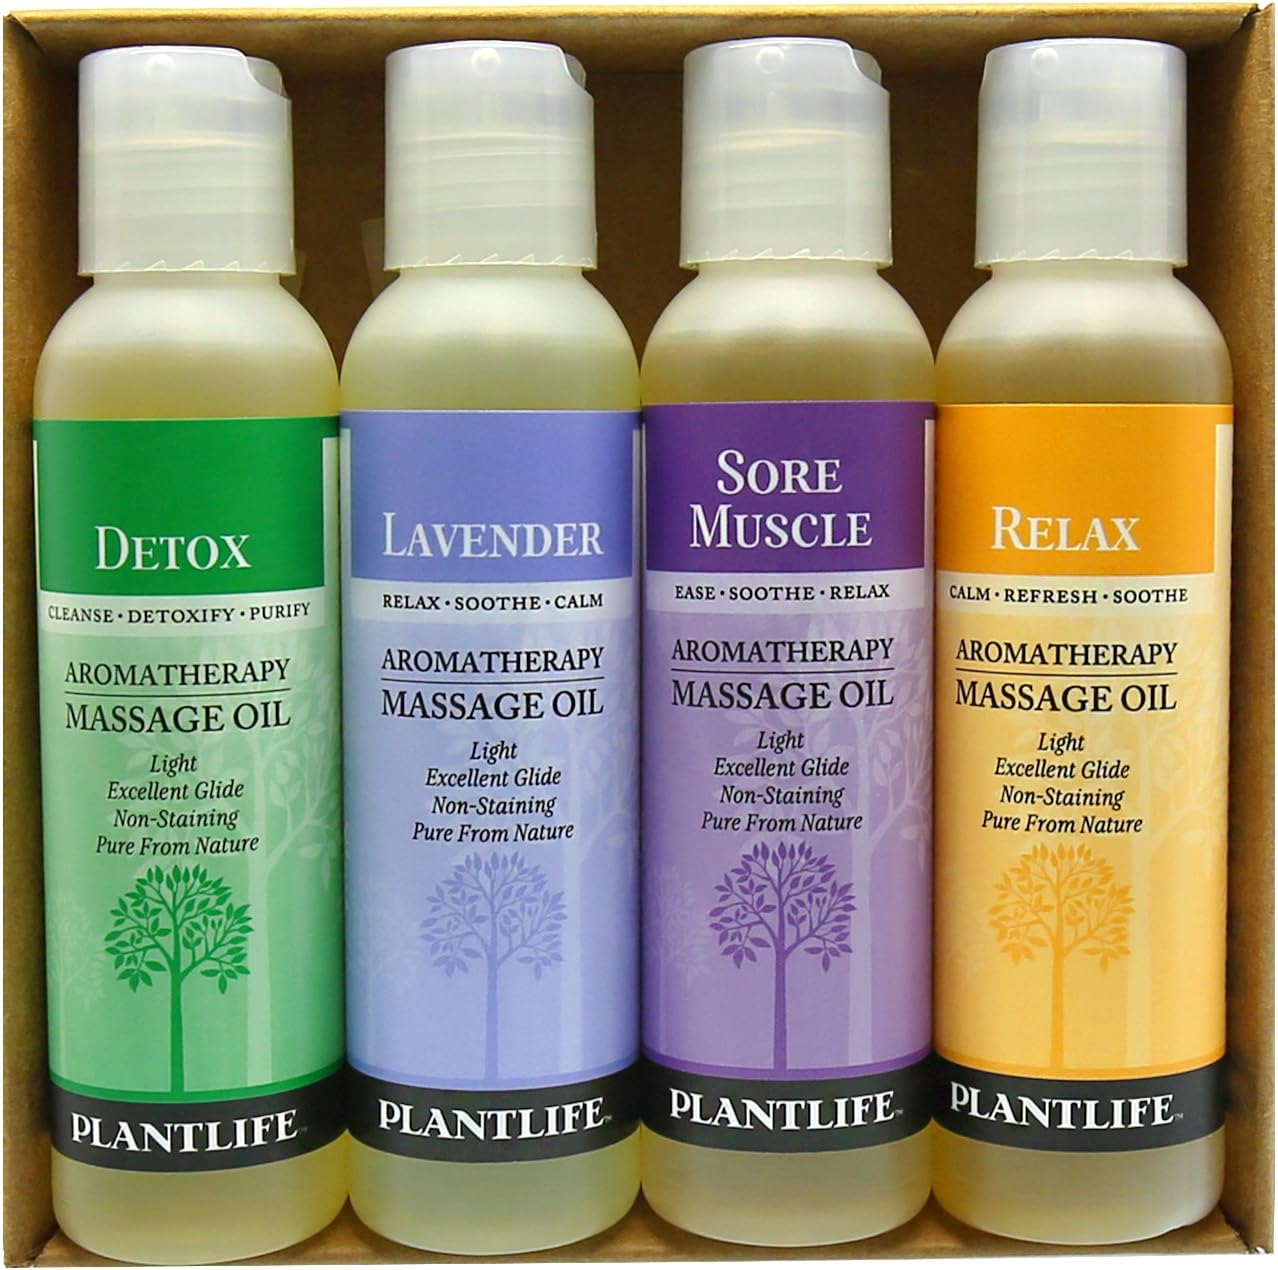 Plantlife Massage Oil 4-Pack - Absorbs Deeply into The Skin and is Cir